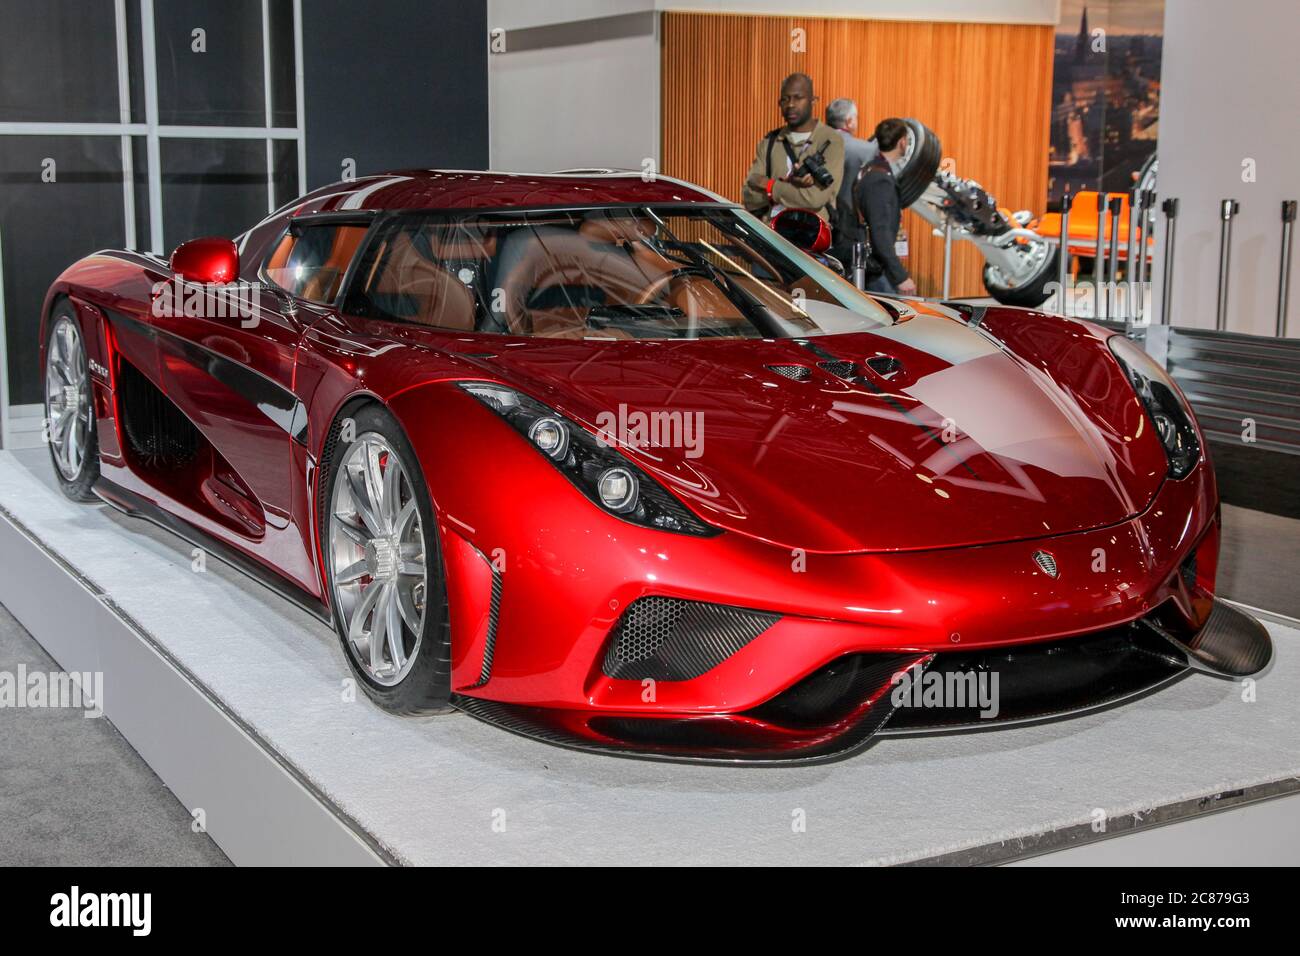 NEW YORK - March 23: The Koenigsegg Automotive AB Regera luxury vehicle is displayed during the 2016 New York International Auto Show in New York, U.S Stock Photo